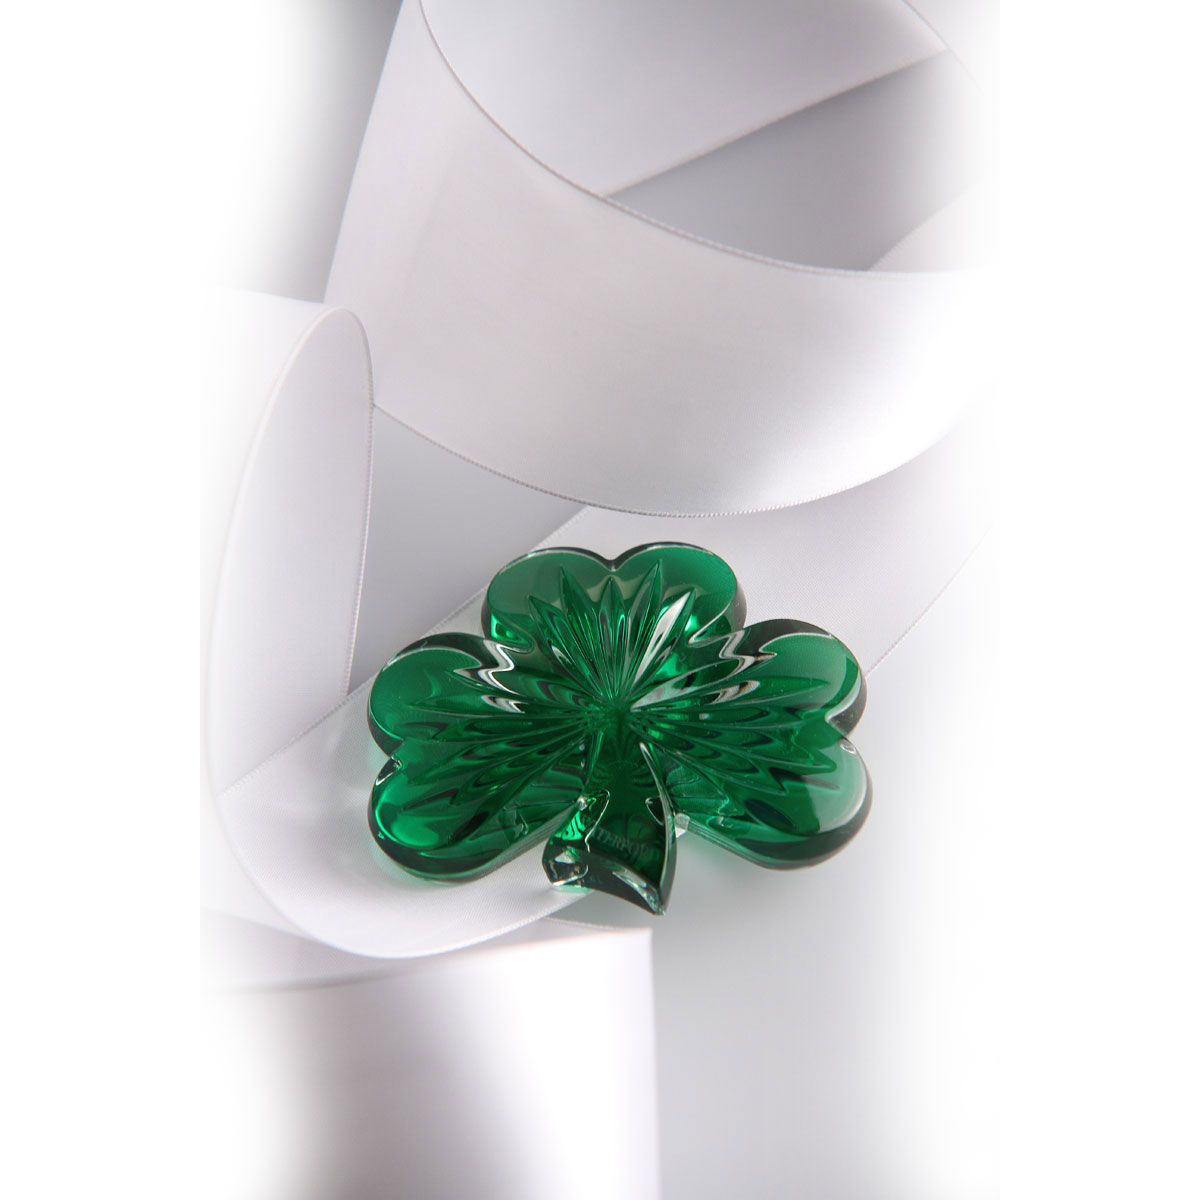 Waterford Crystal, Green Shamrock Crystal Paperweight